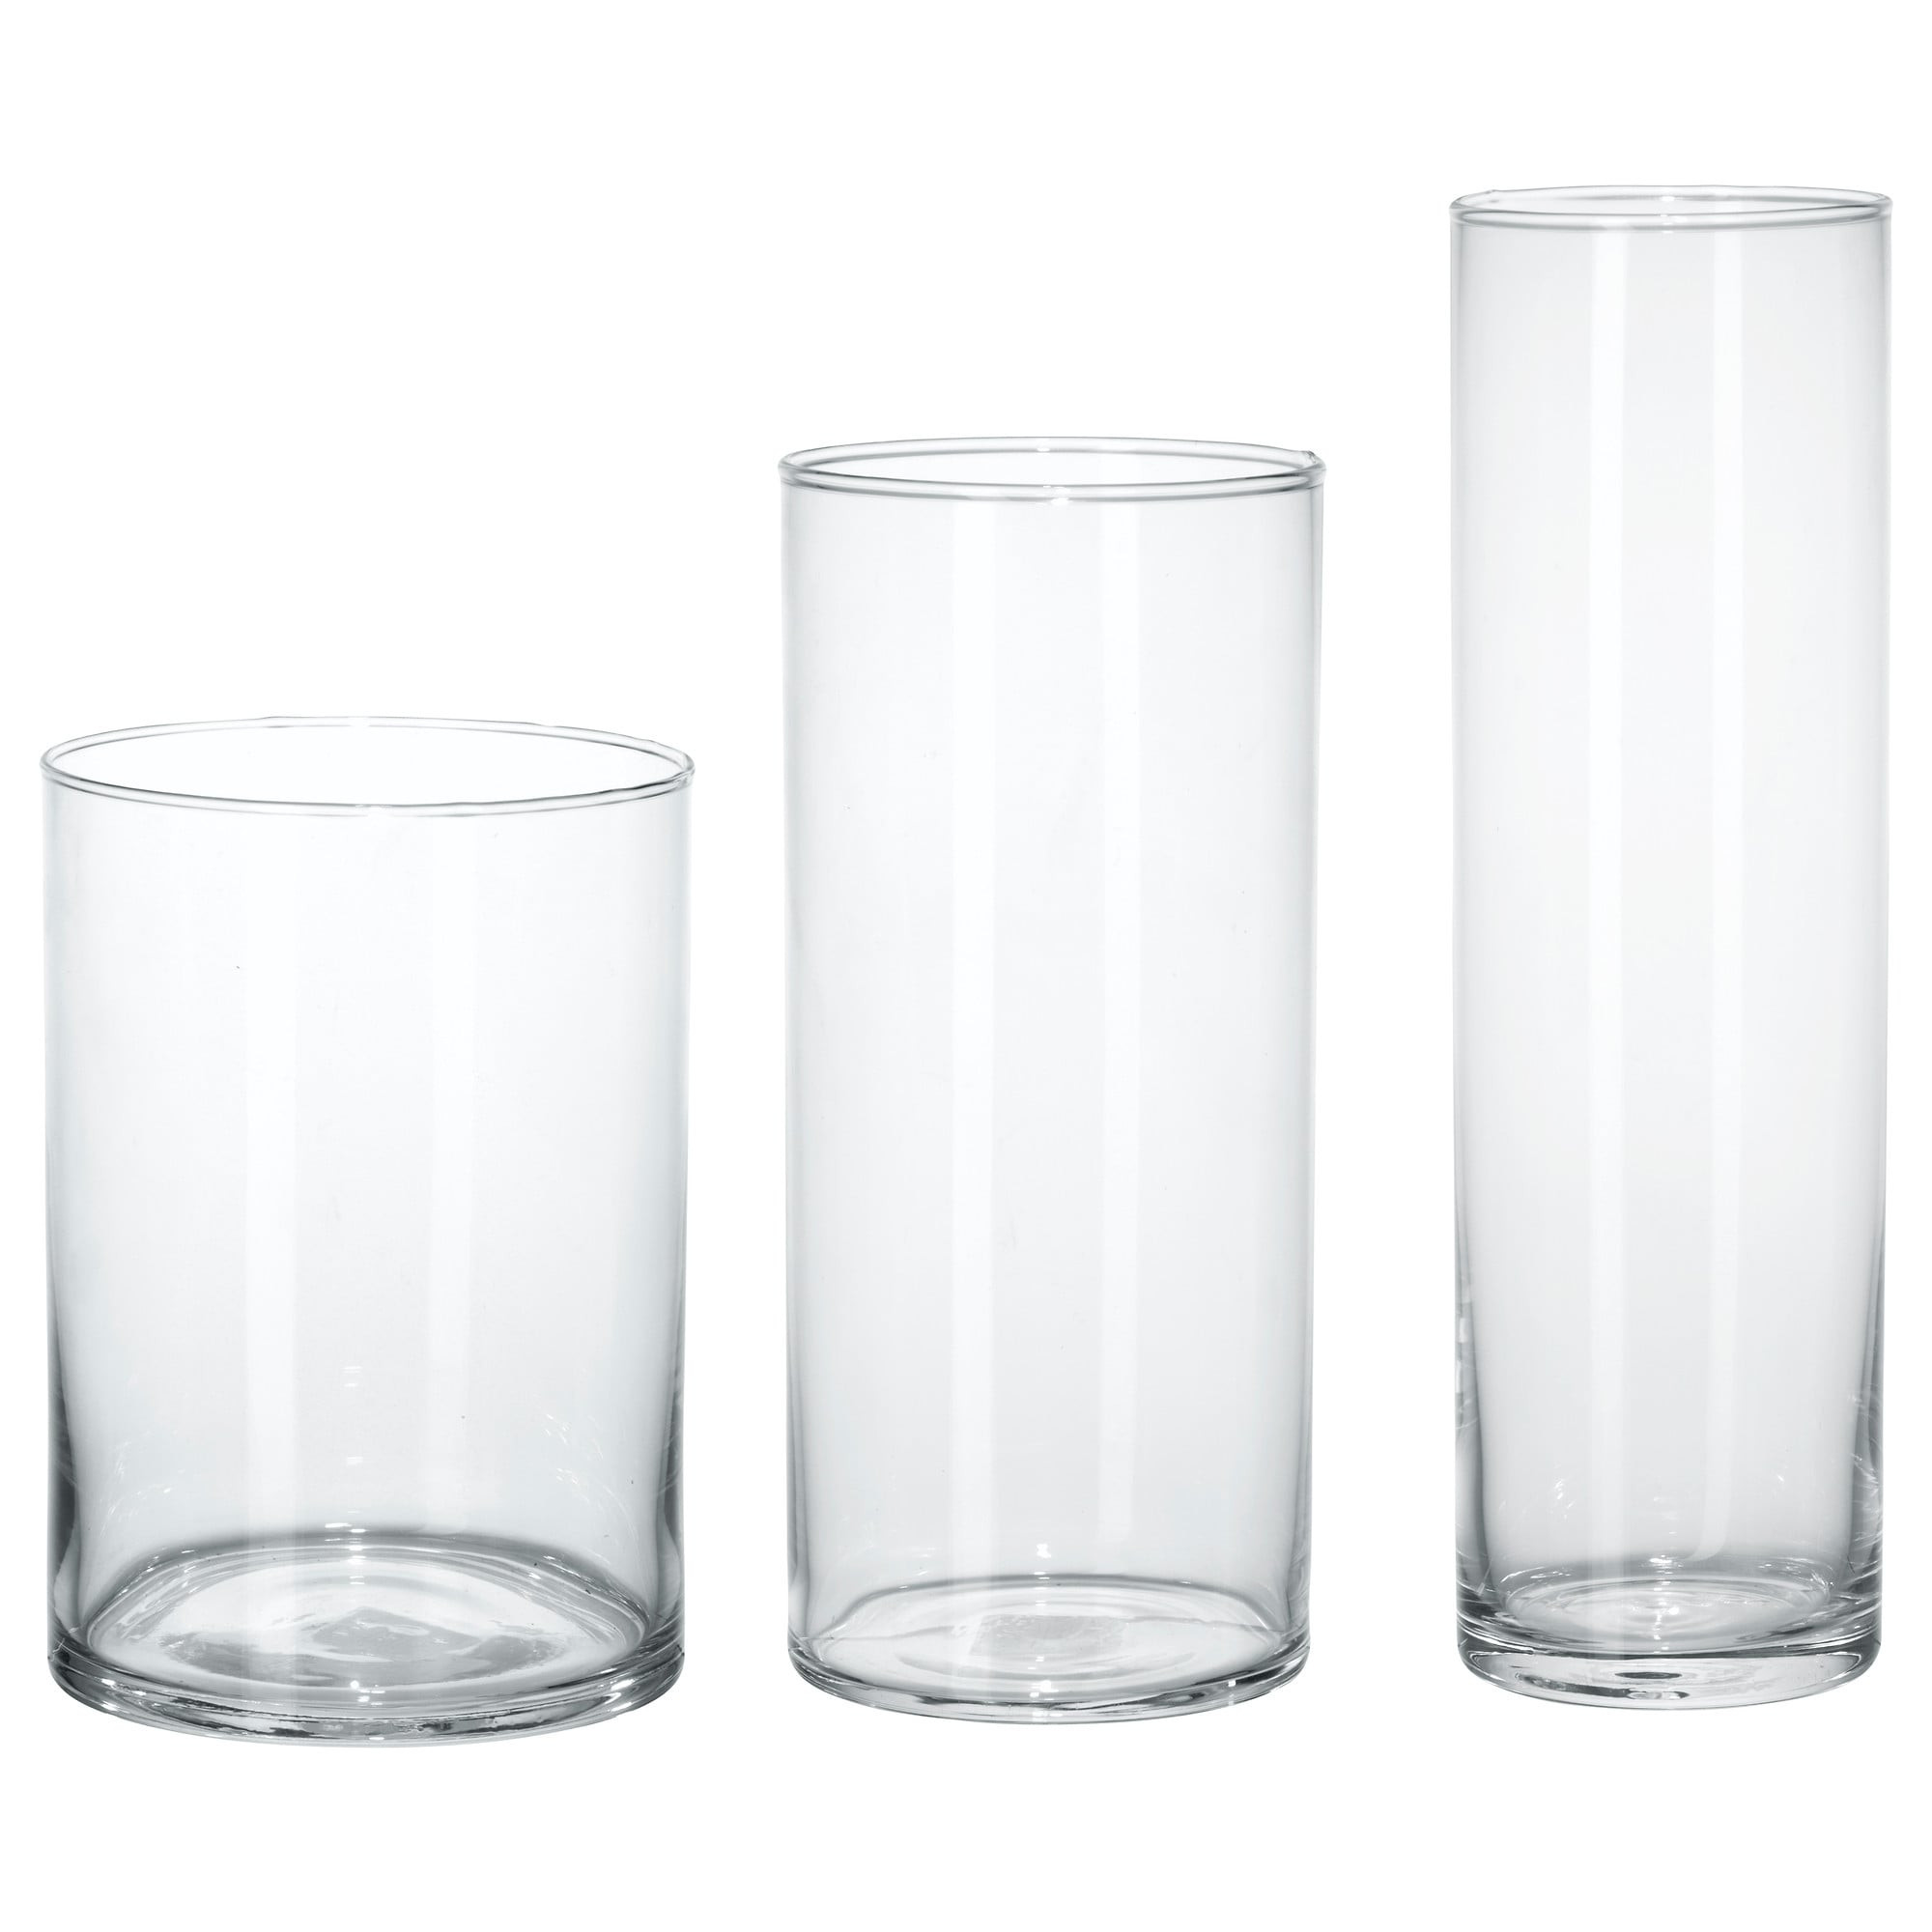 10 Recommended Large Cylinder Vases Cheap 2024 free download large cylinder vases cheap of cylinder vase set of 3 ikea inside english franac2a7ais